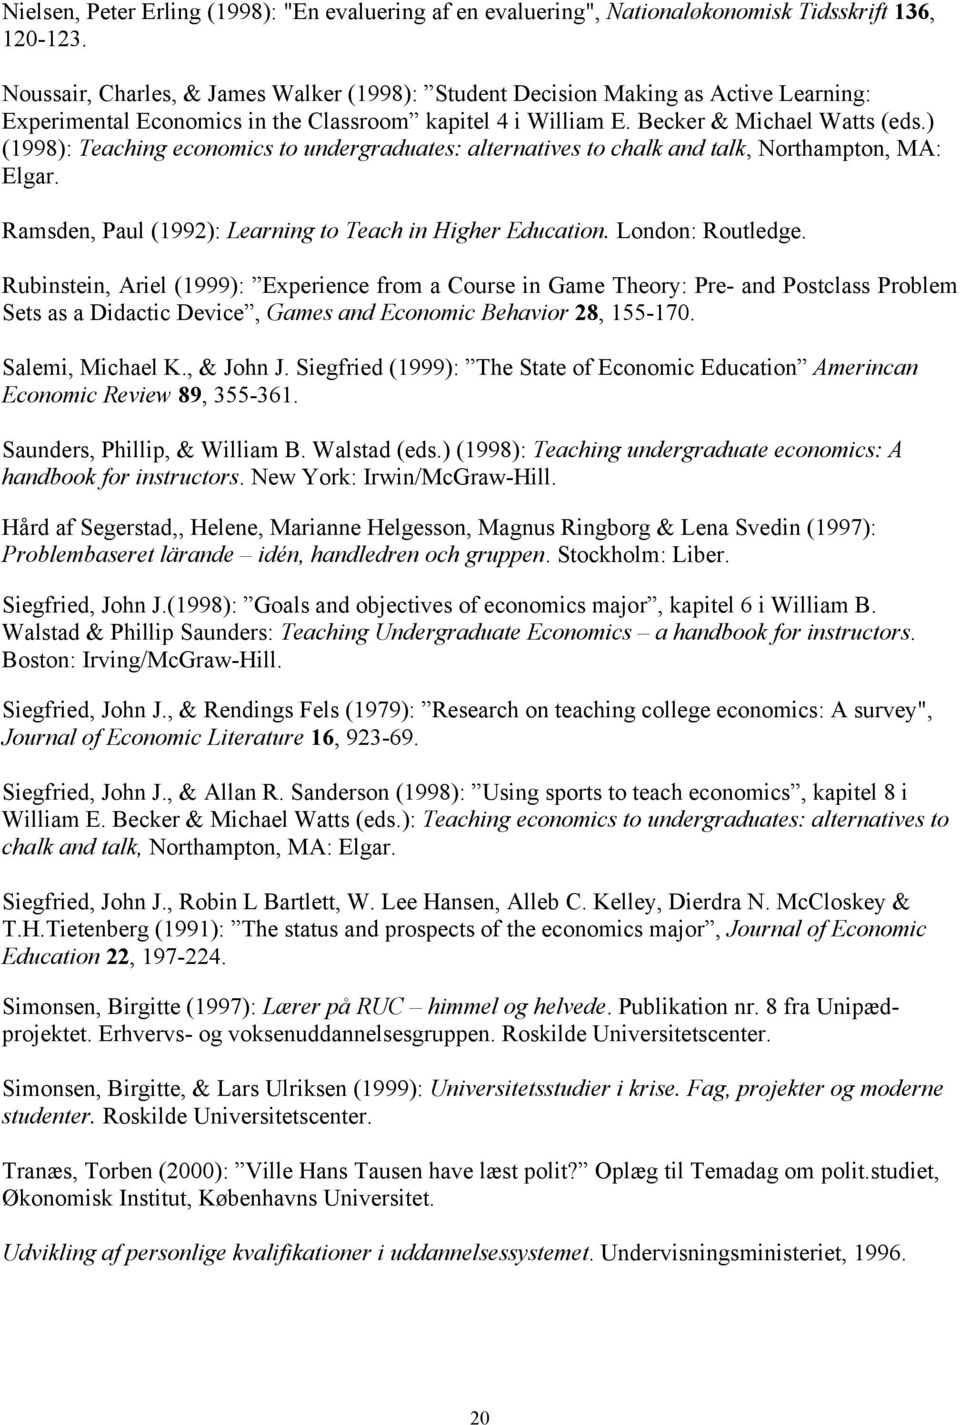 ) (1998): Teaching economics to undergraduates: alternatives to chalk and talk, Northampton, MA: Elgar. Ramsden, Paul (1992): Learning to Teach in Higher Education. London: Routledge.